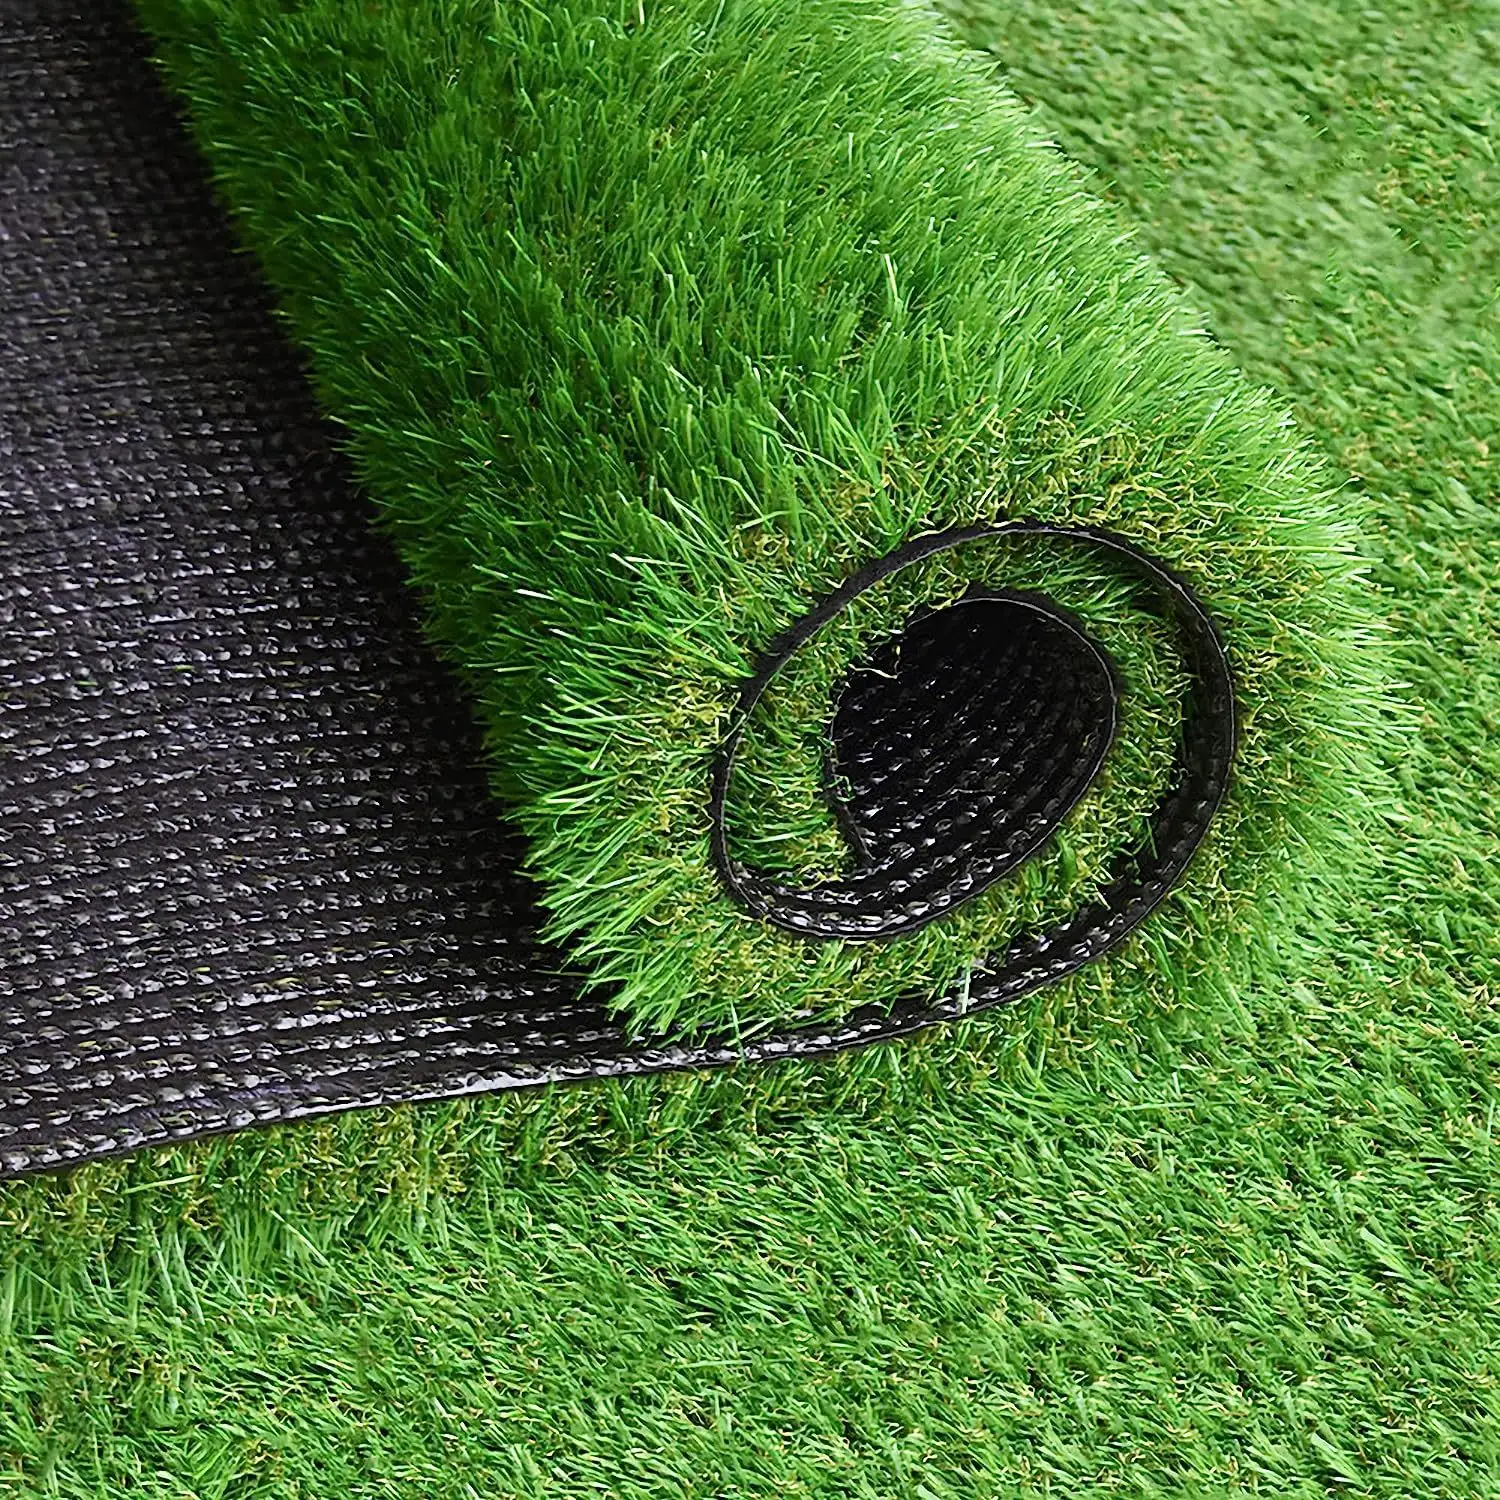 Yopin-2112 Synthetic Turf Grass Putting Green Artificial Turf For Garden Decoration